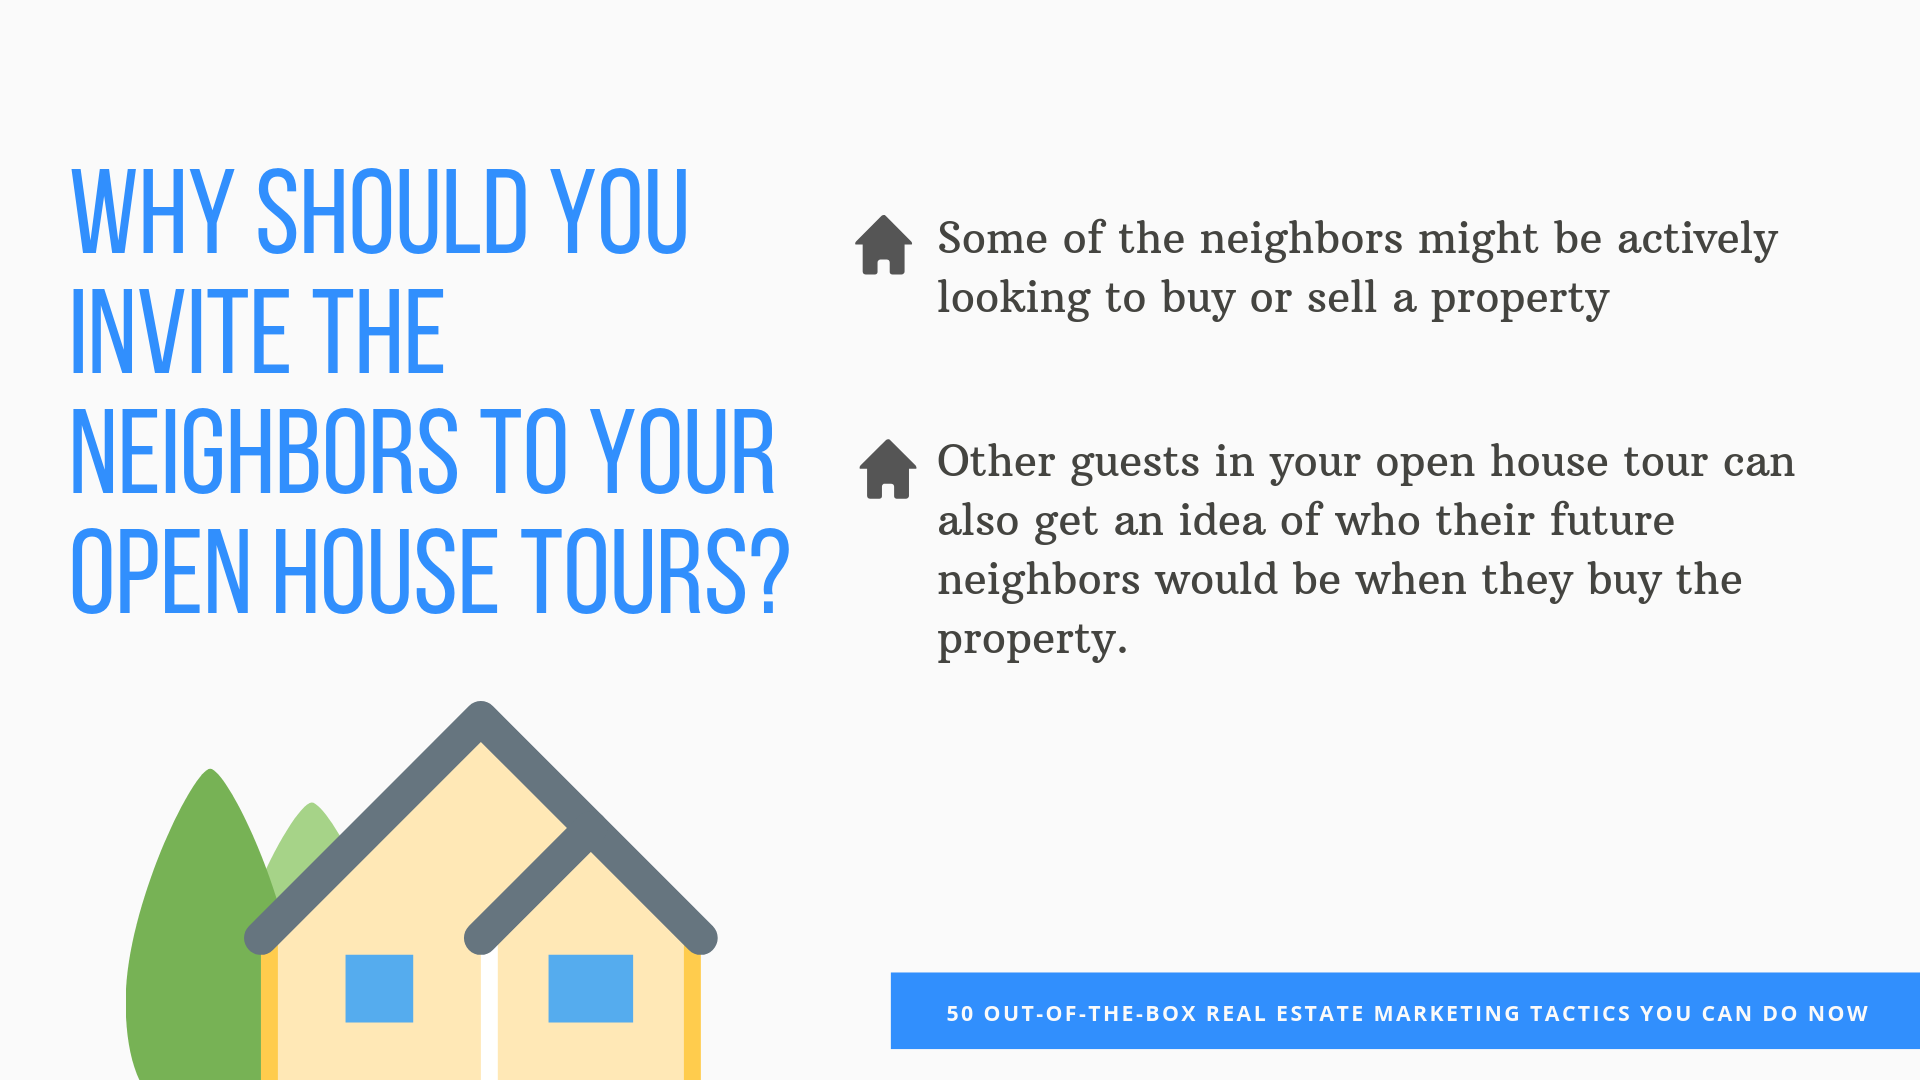 WHY SHOULD YOU INVITE THE NEIGHBORS TO YOUR OPEN HOUSE TOURS_